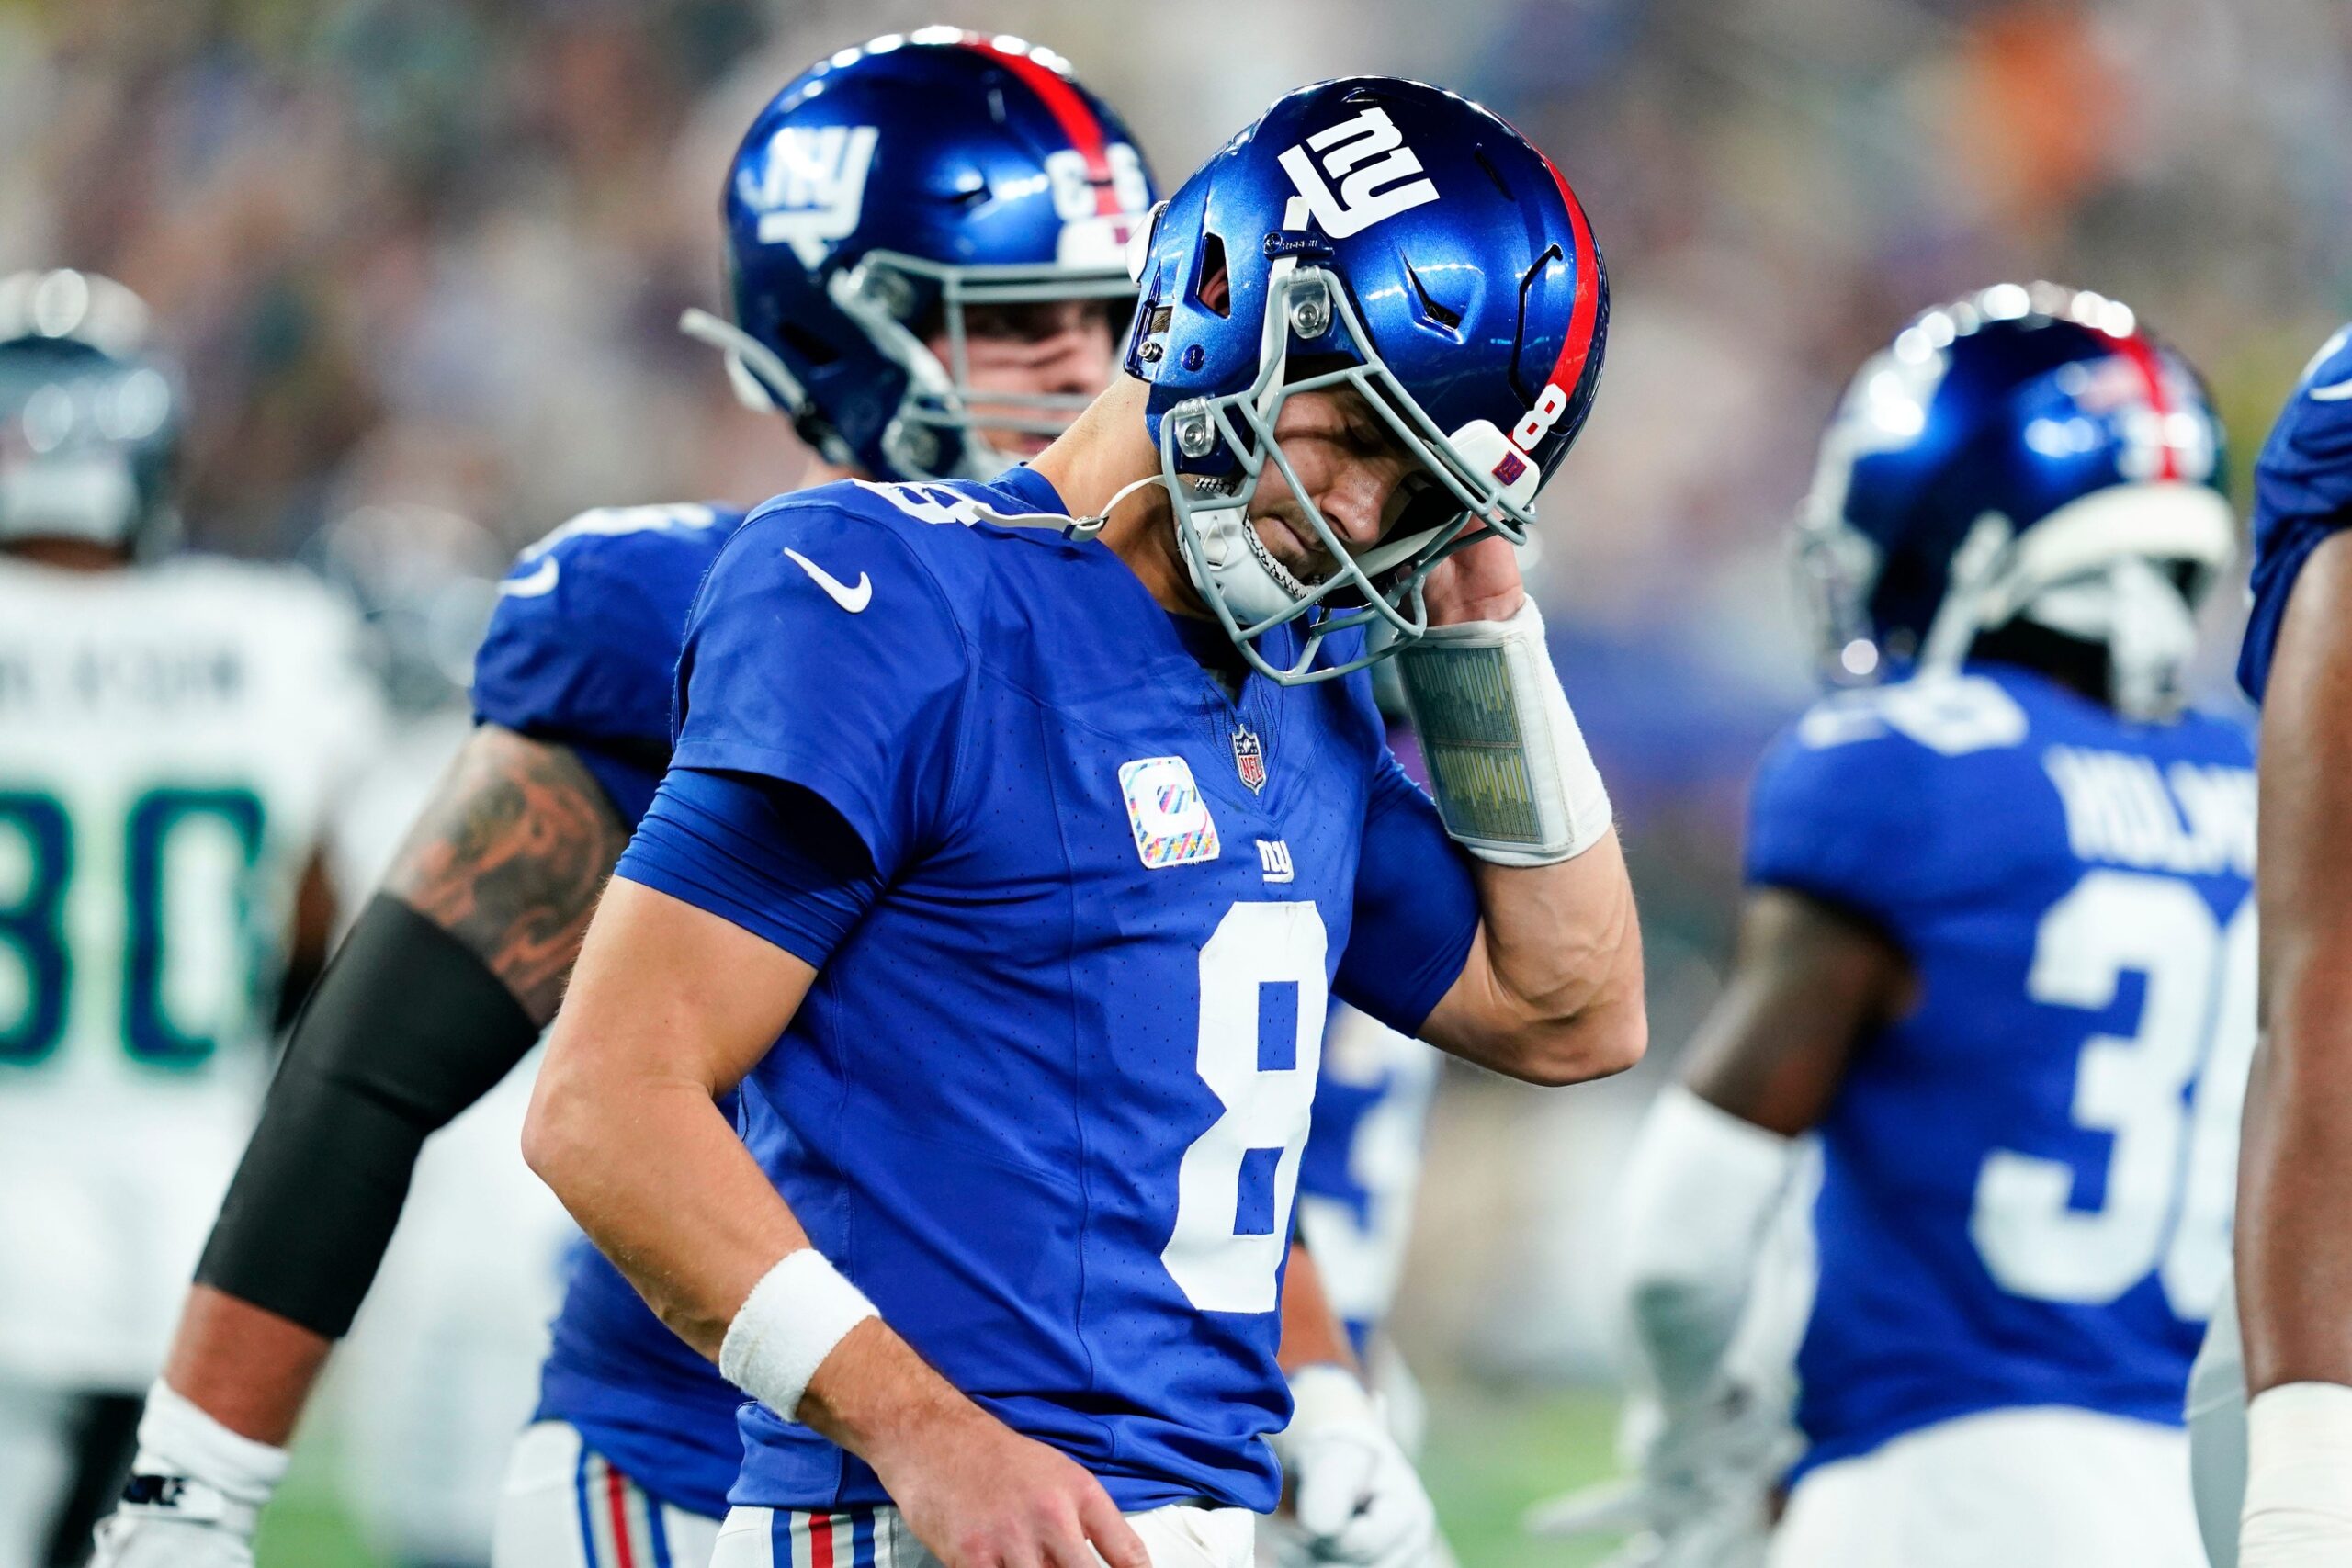 NFL Rumors: The Giants Are Absolutely Done With Daniel Jones